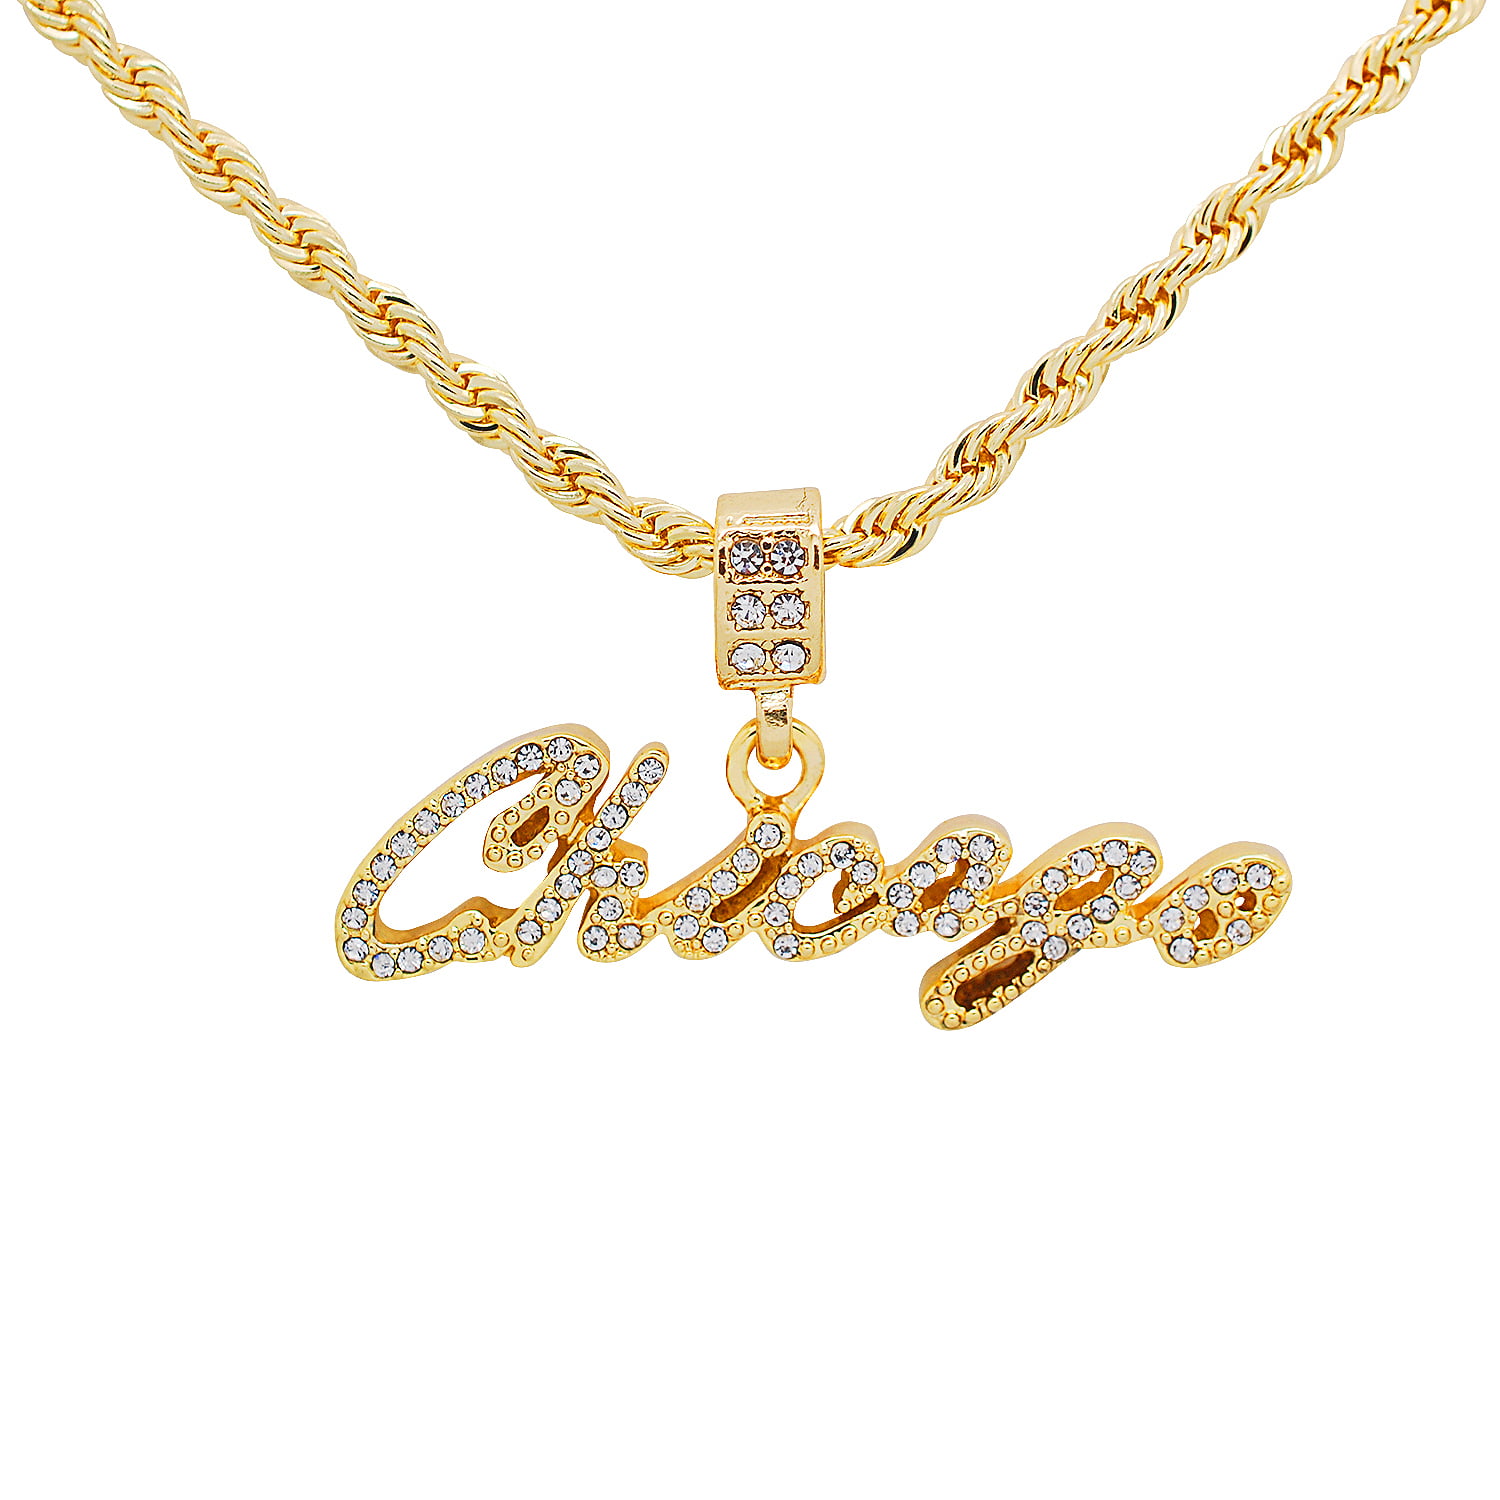 Yellow Gold-Tone Hip Hop Bling CursiveChicago Letter Pendant with 16 Tennis Chain and 24 Rope Chain 